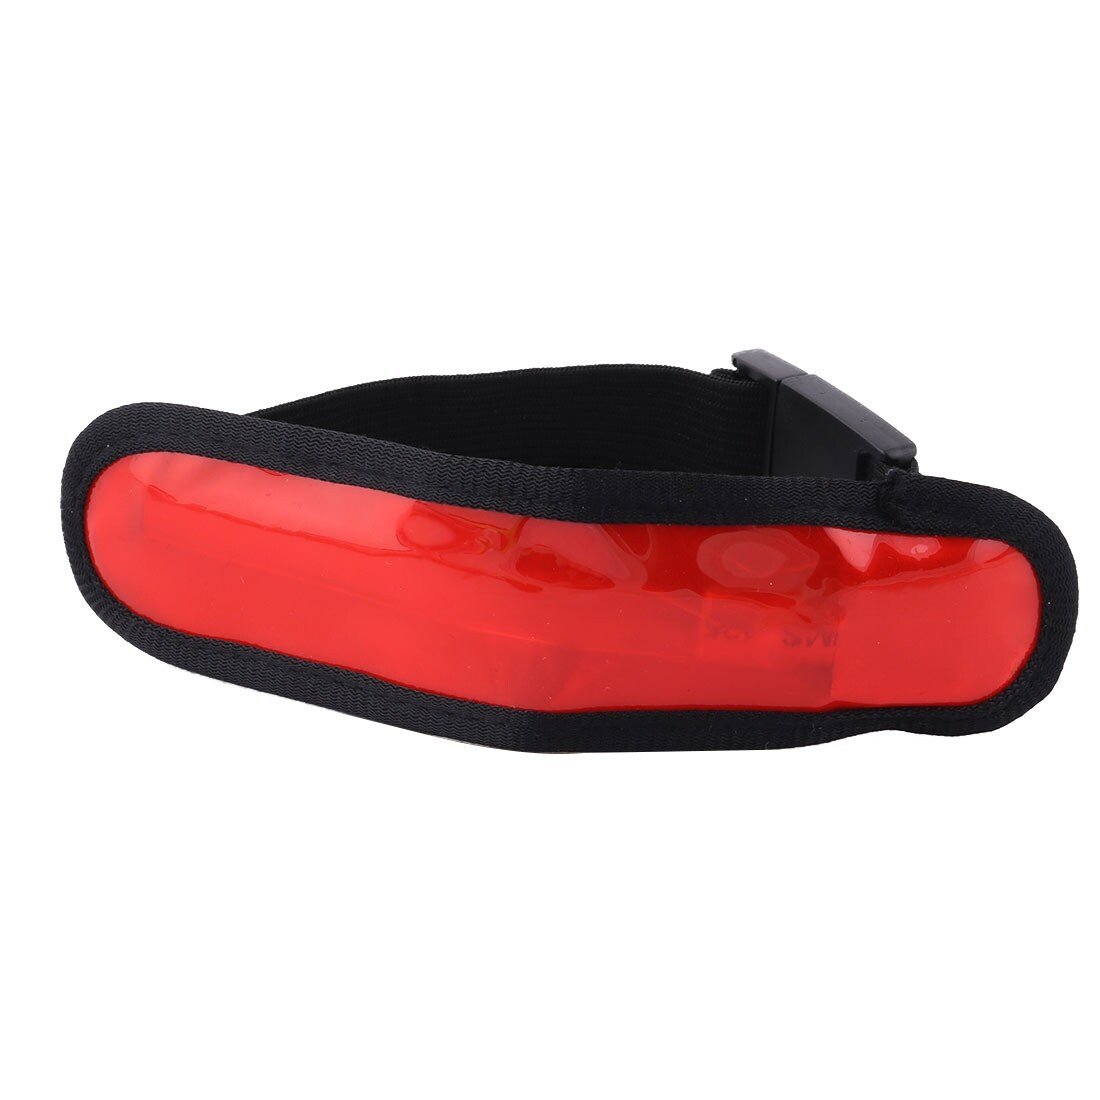 Sports LED Glowing Reflective Elastic Adjustable Buckle Night Safety Armband  Red - Red,Black - Bed Bath & Beyond - 18352033